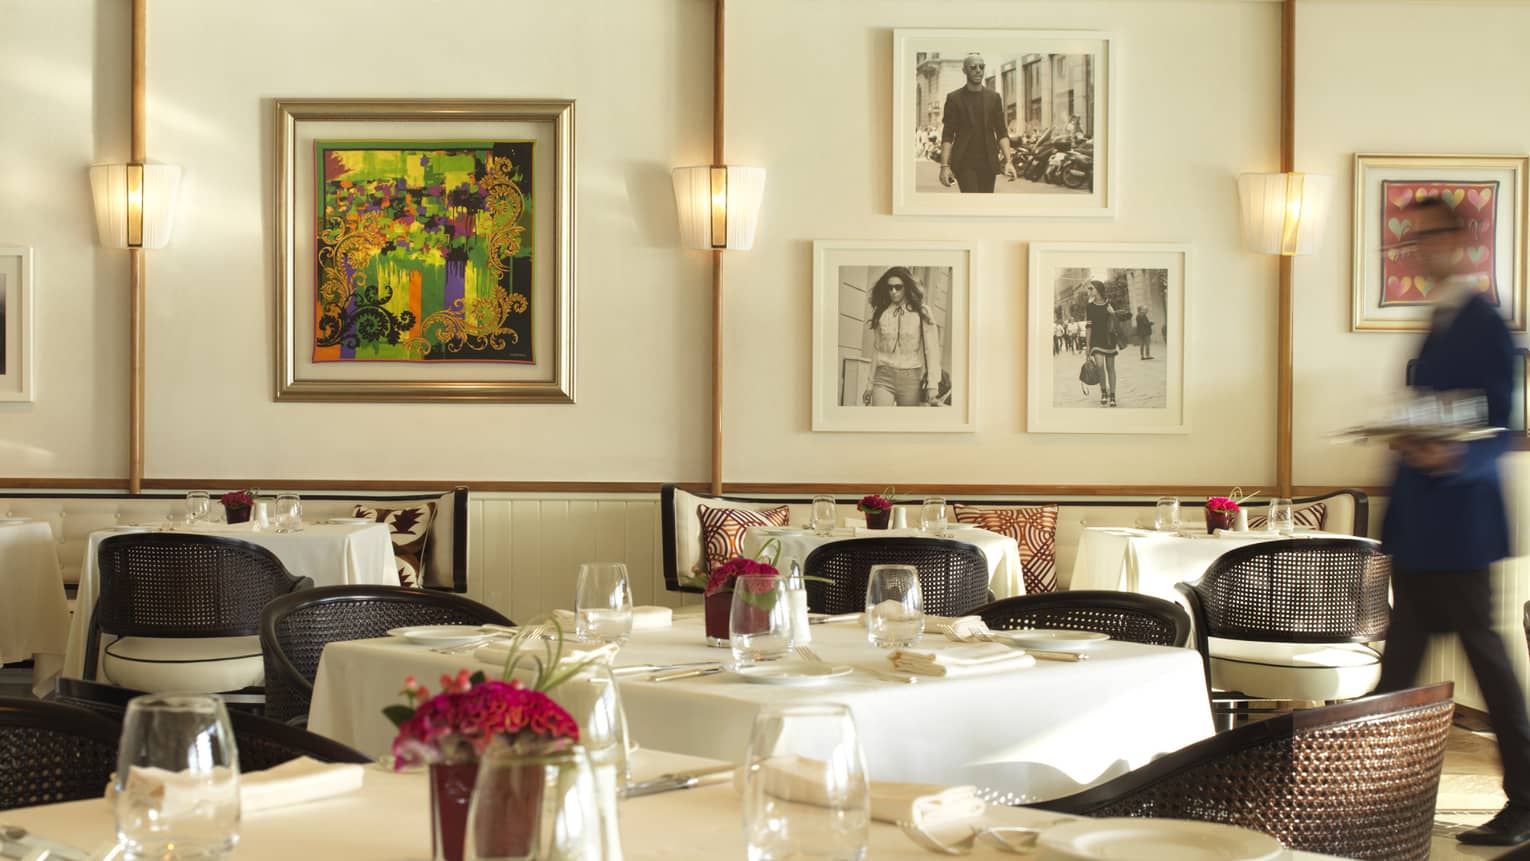 Server in blue suit walks through Cafe Milano dining room with elegant white dining tables, colourful art, framed black-and-white photos